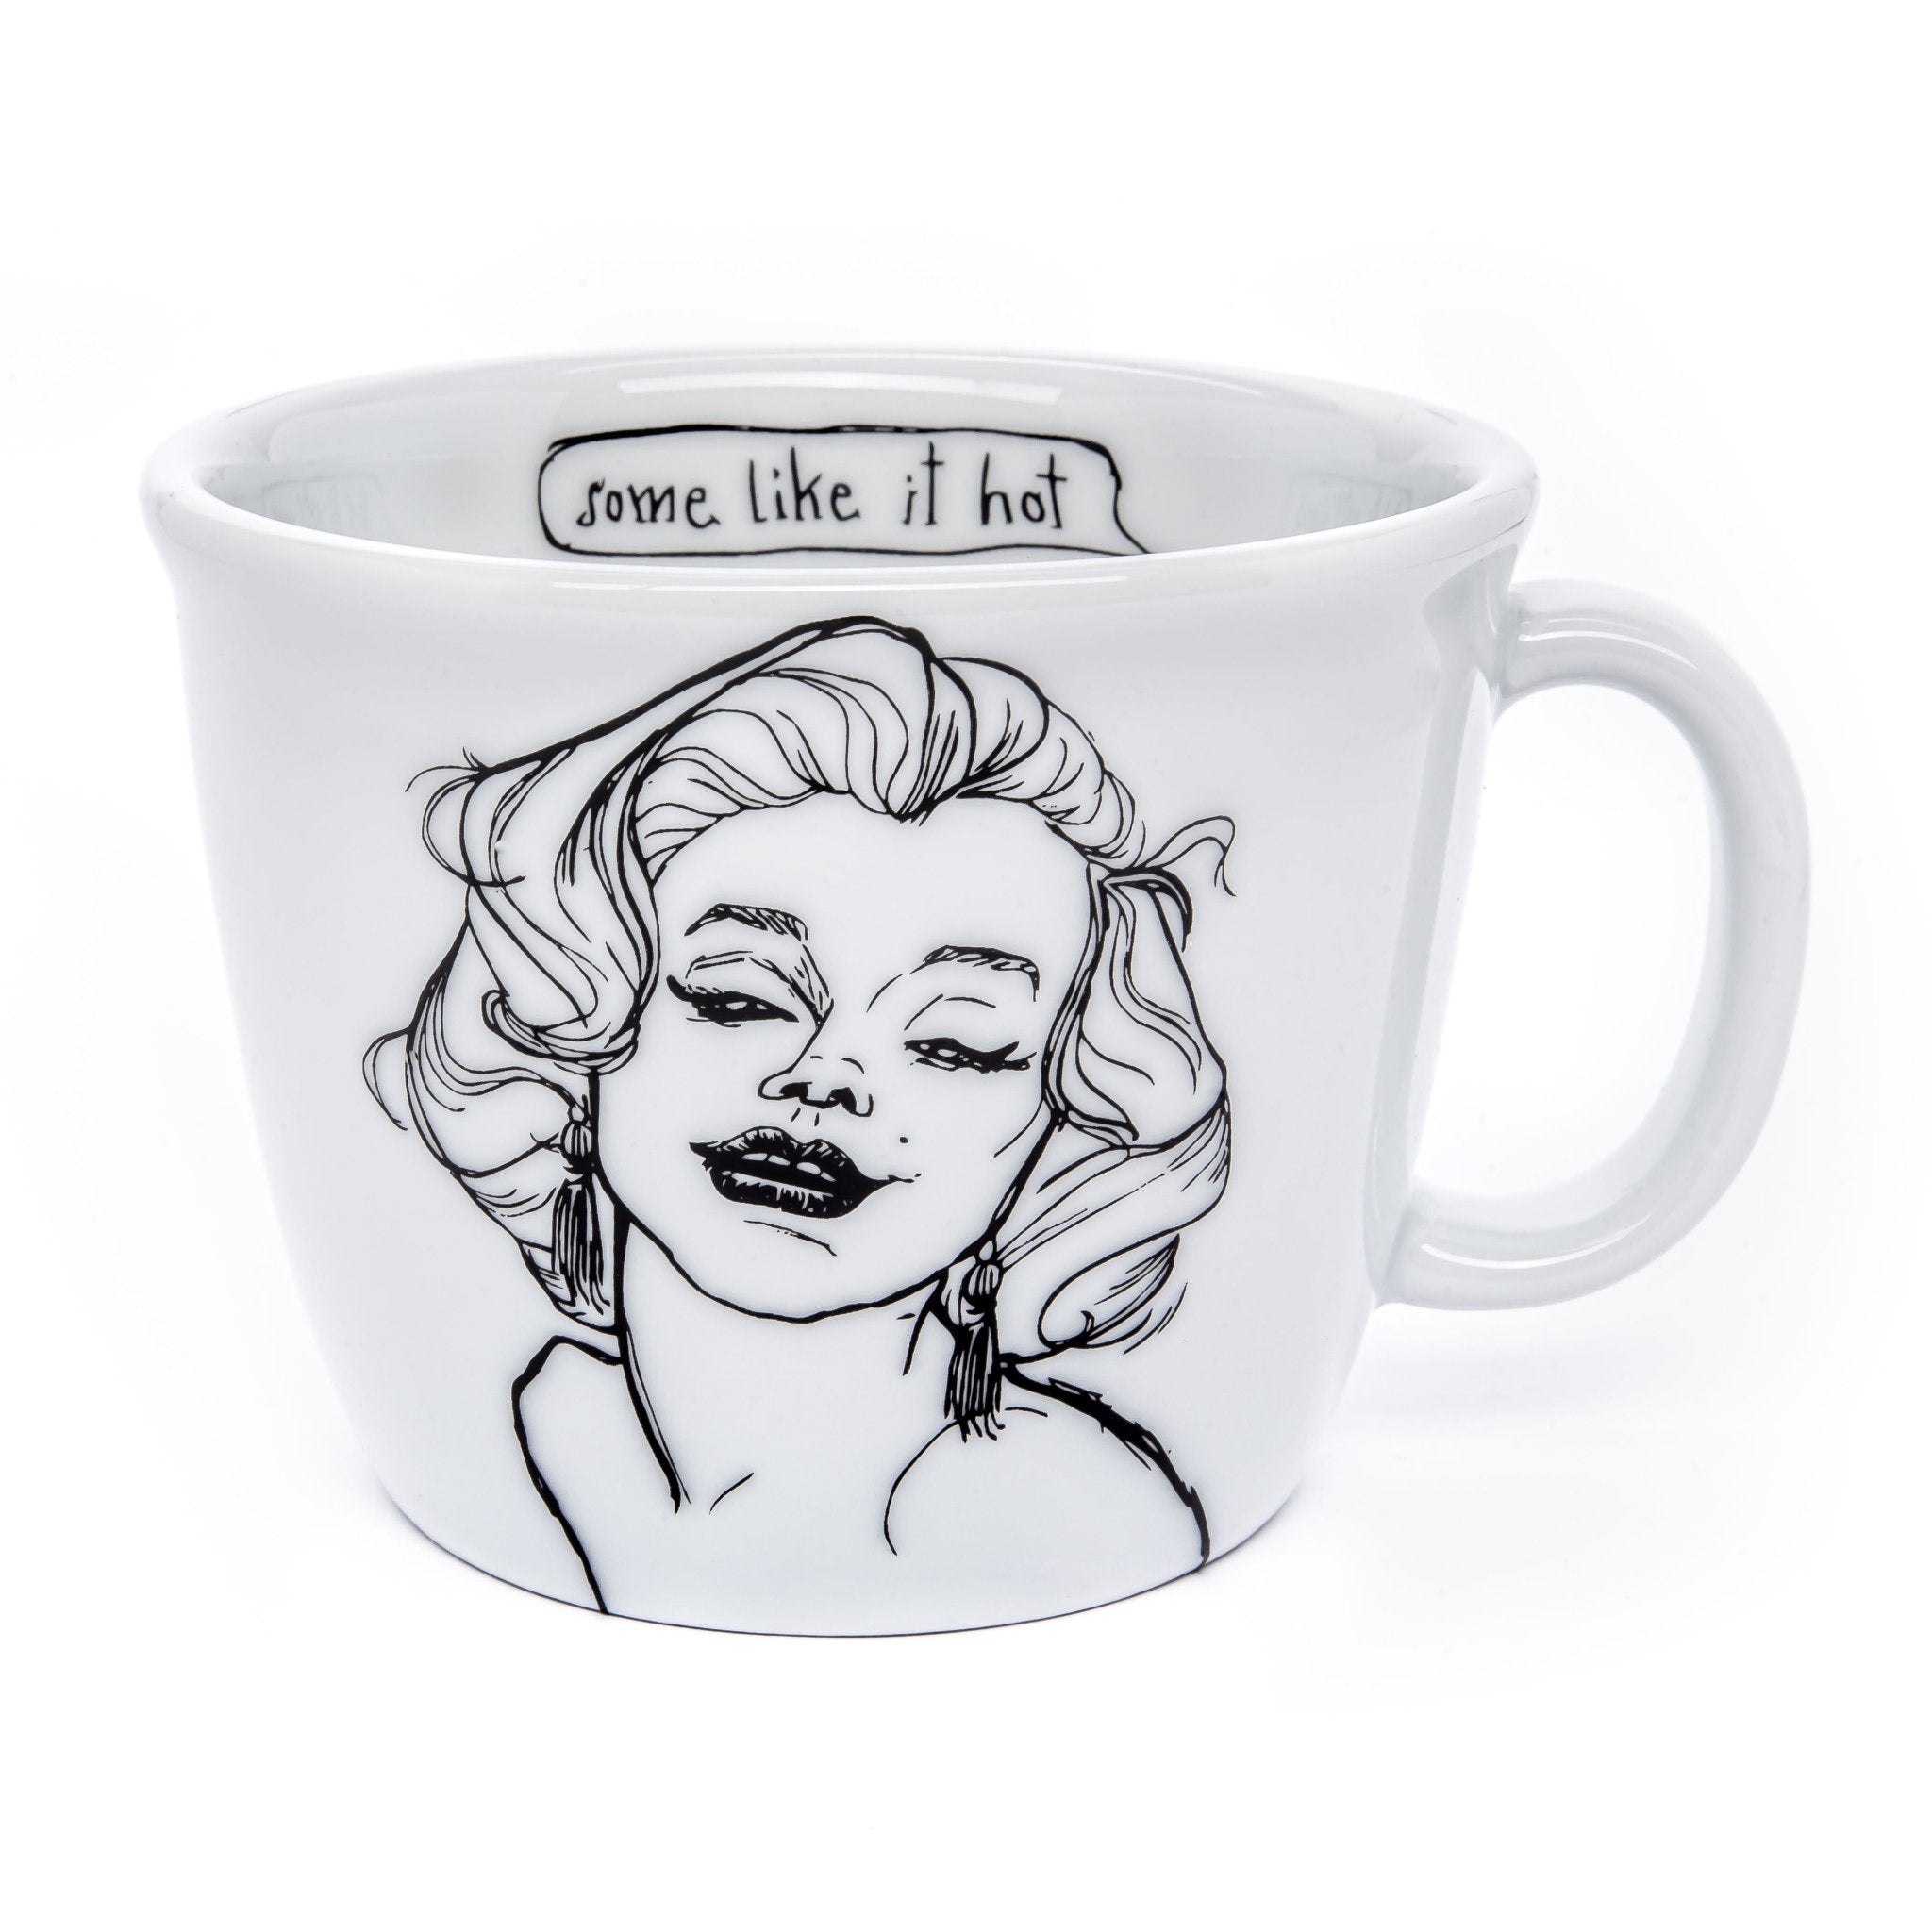 Porcelain cup inspired by Marilyn Monroe